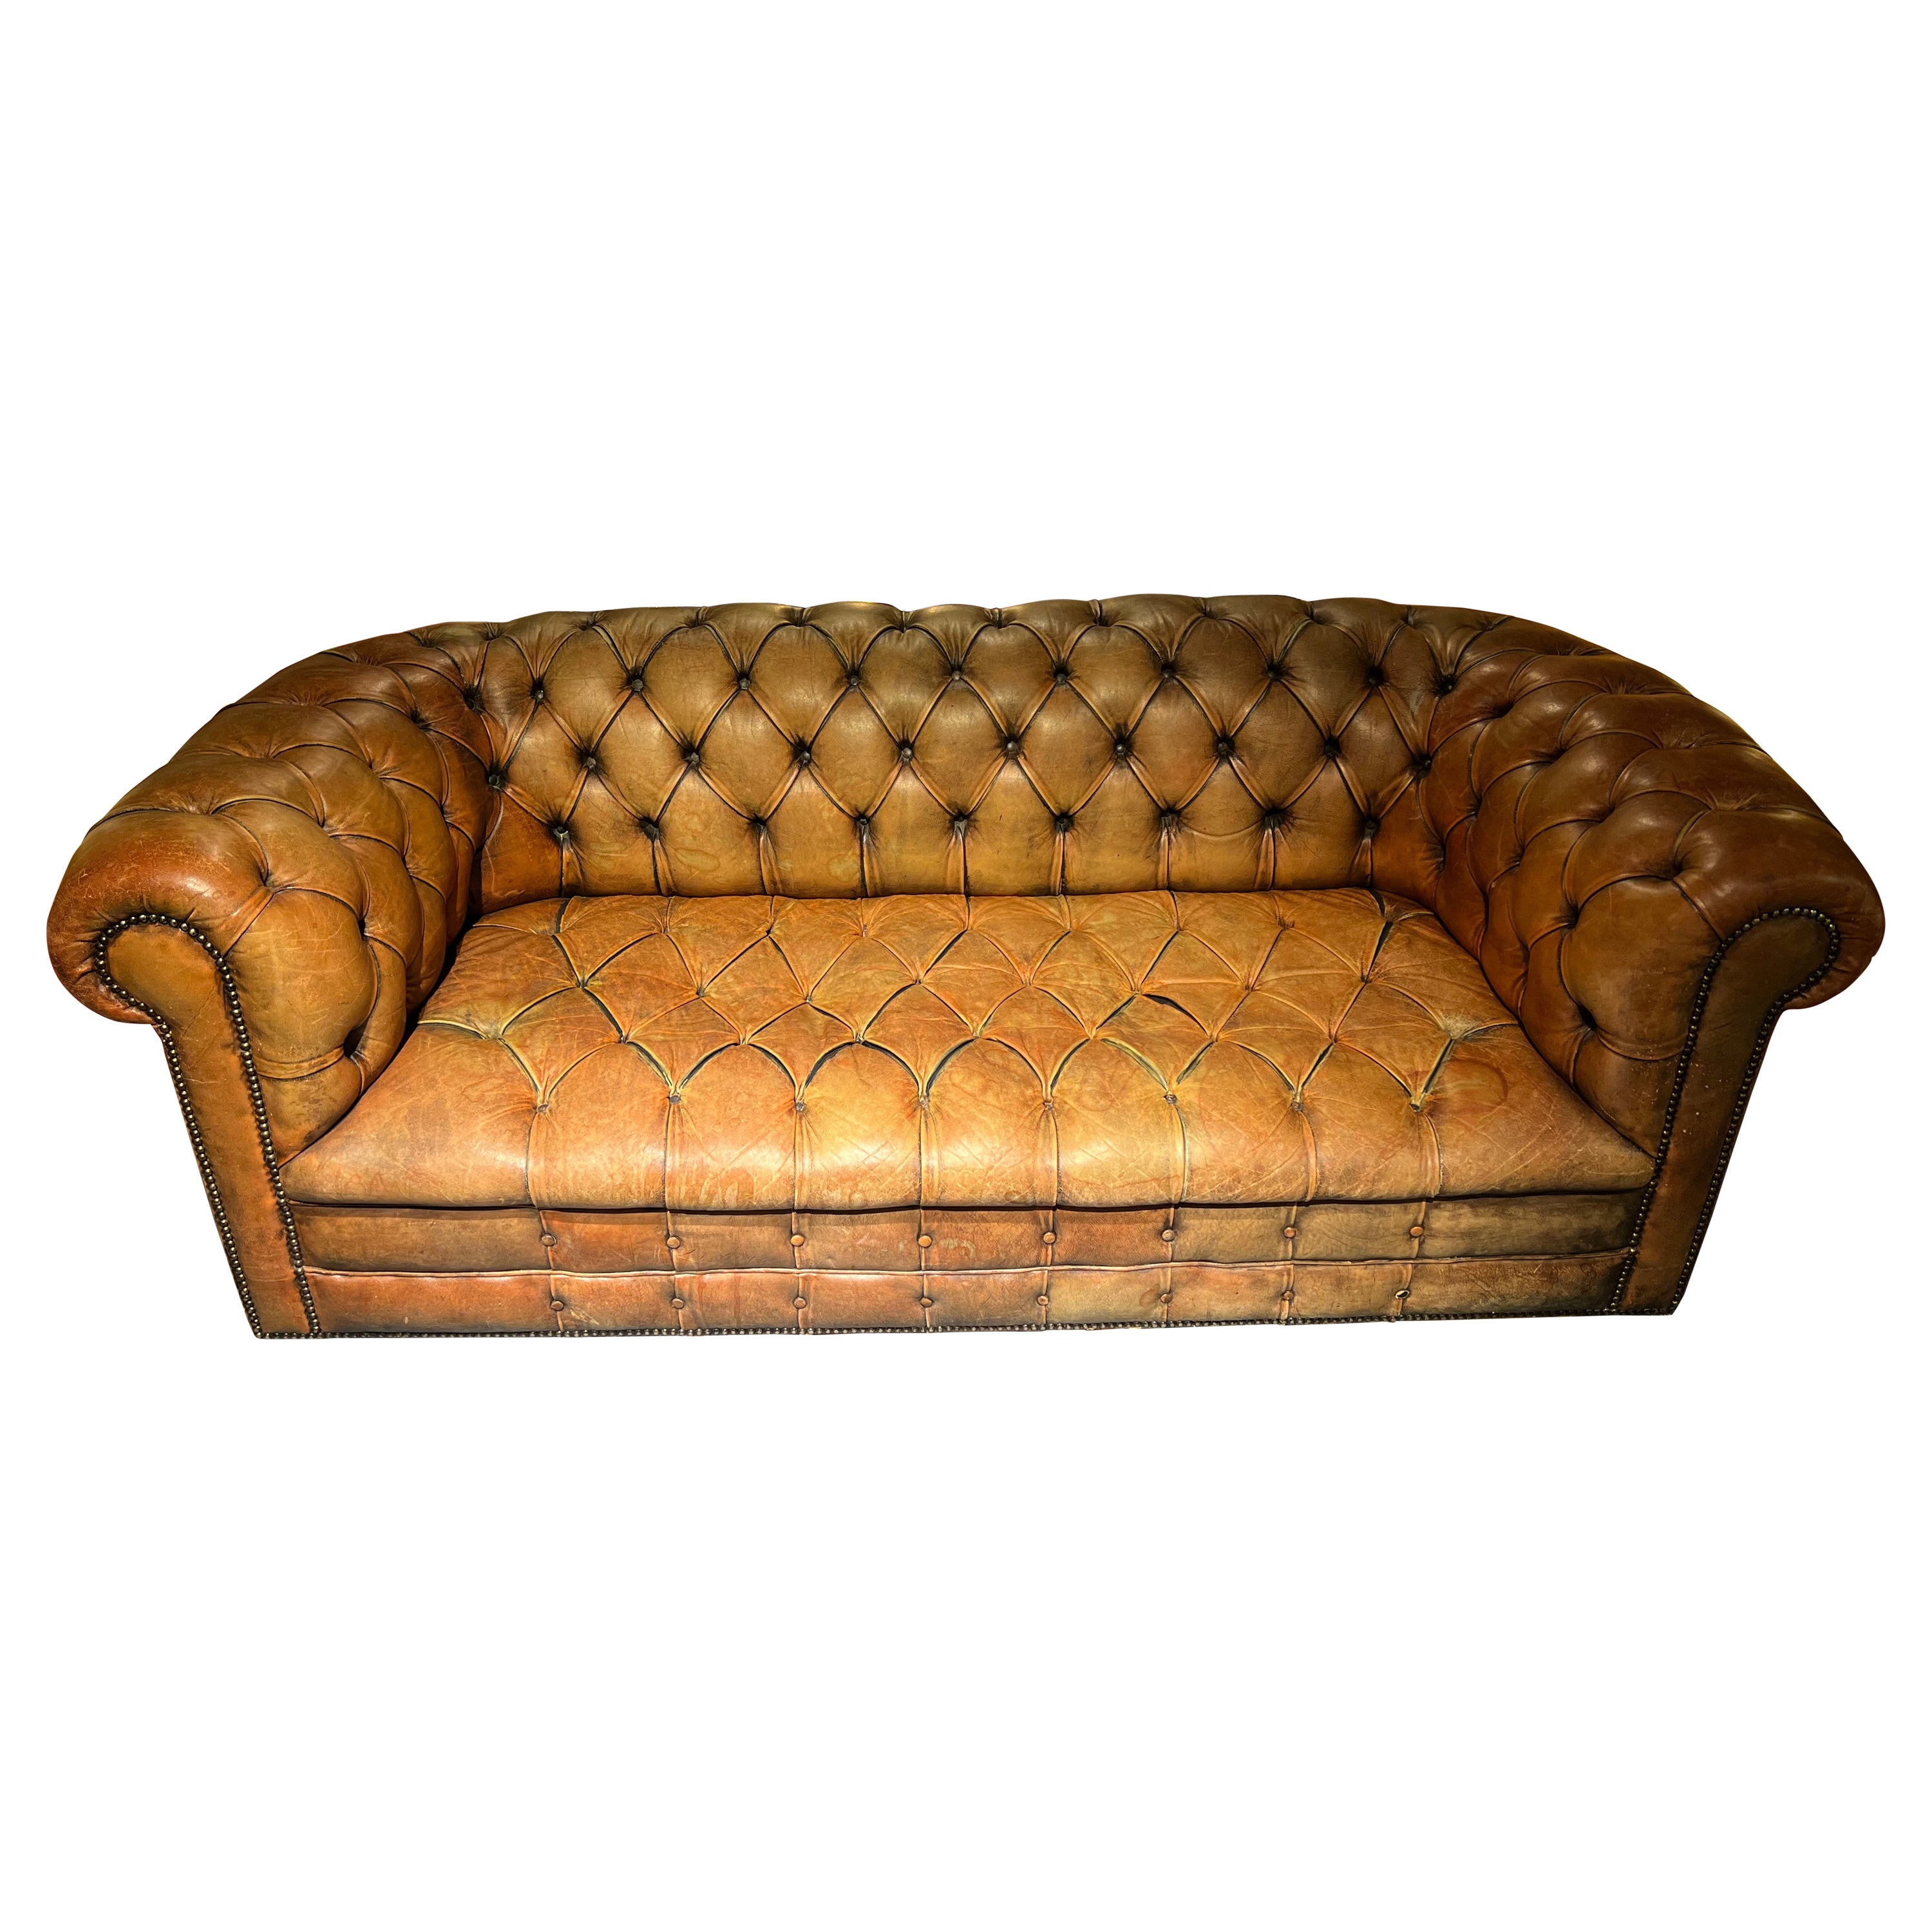 Original Vintage Chesterfield Sofa Faded Brown from around 1978 High Quality For Sale